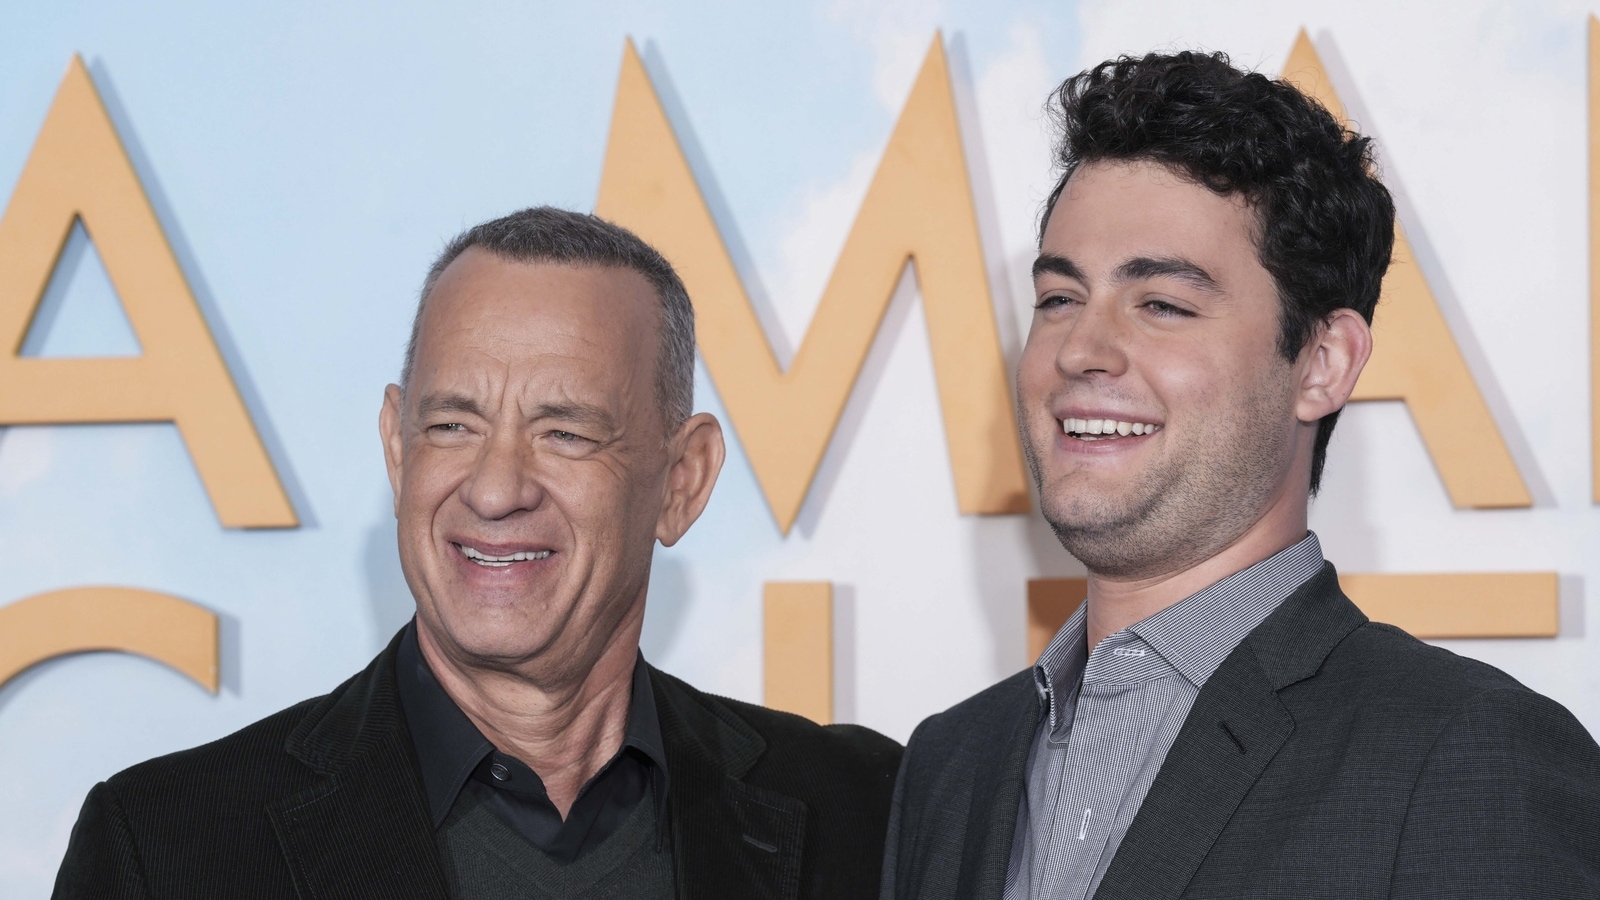 Tom Hanks defends son's role in his new film amid nepotism allegations |  Hollywood - Hindustan Times